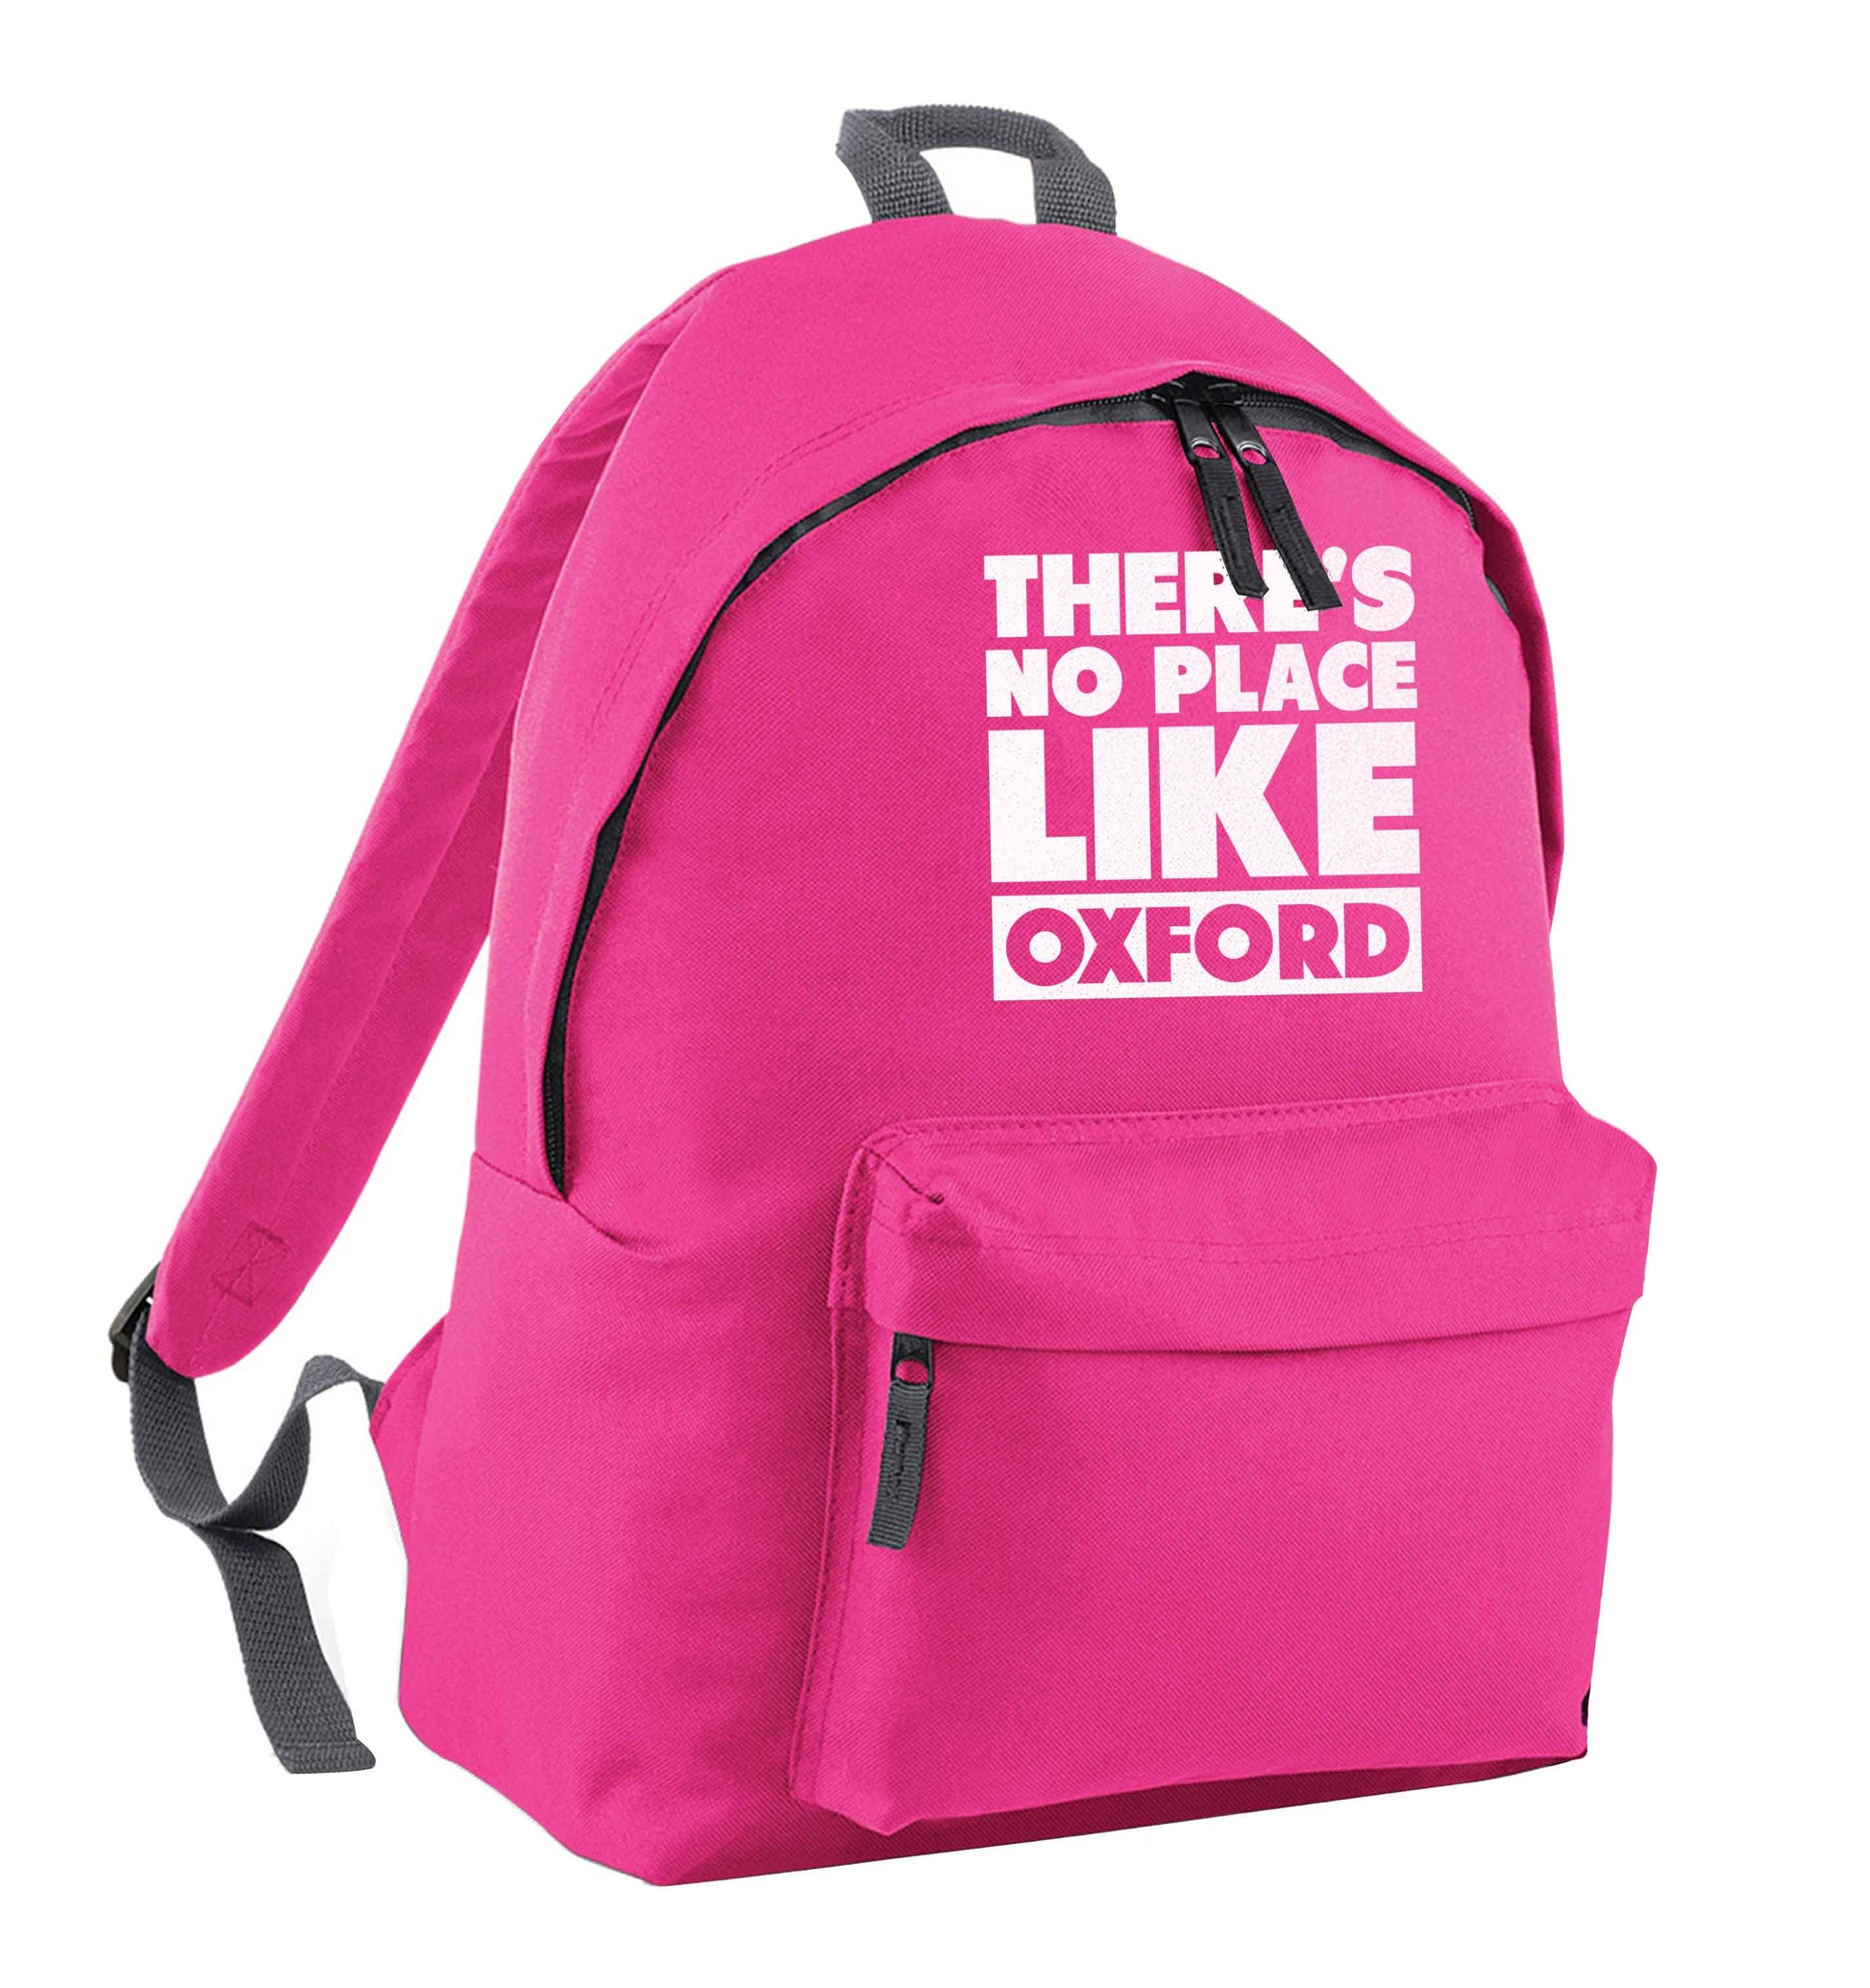 There's no place like Oxford pink children's backpack